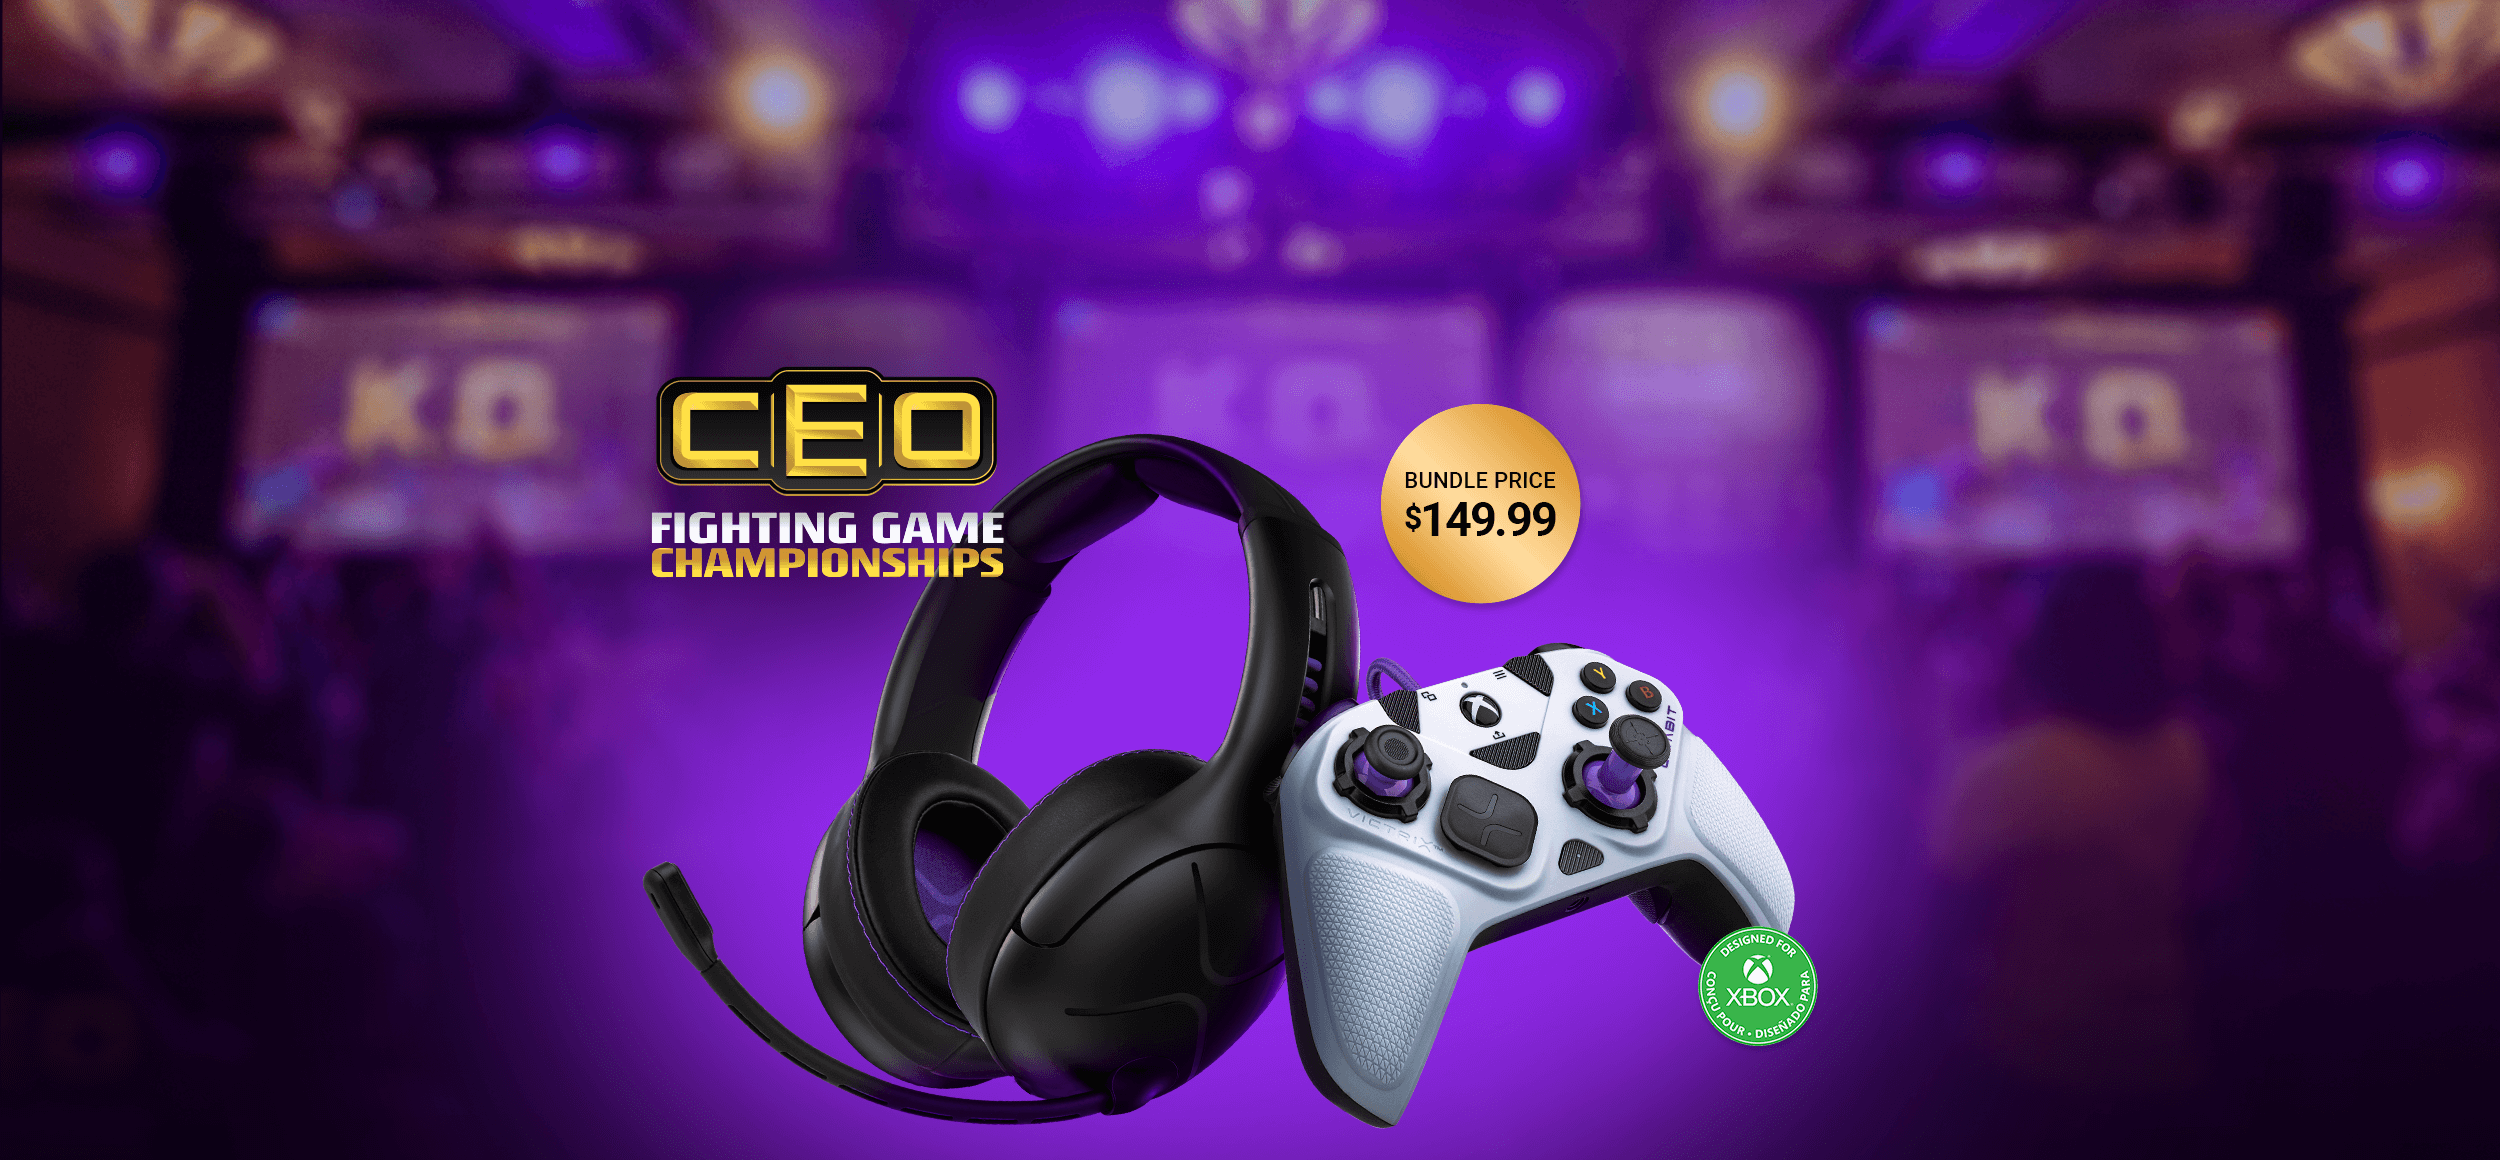 PDP / Victrix Gambit Controller + Headset $119.99 after email signup promo (CEO Tournament bundle)